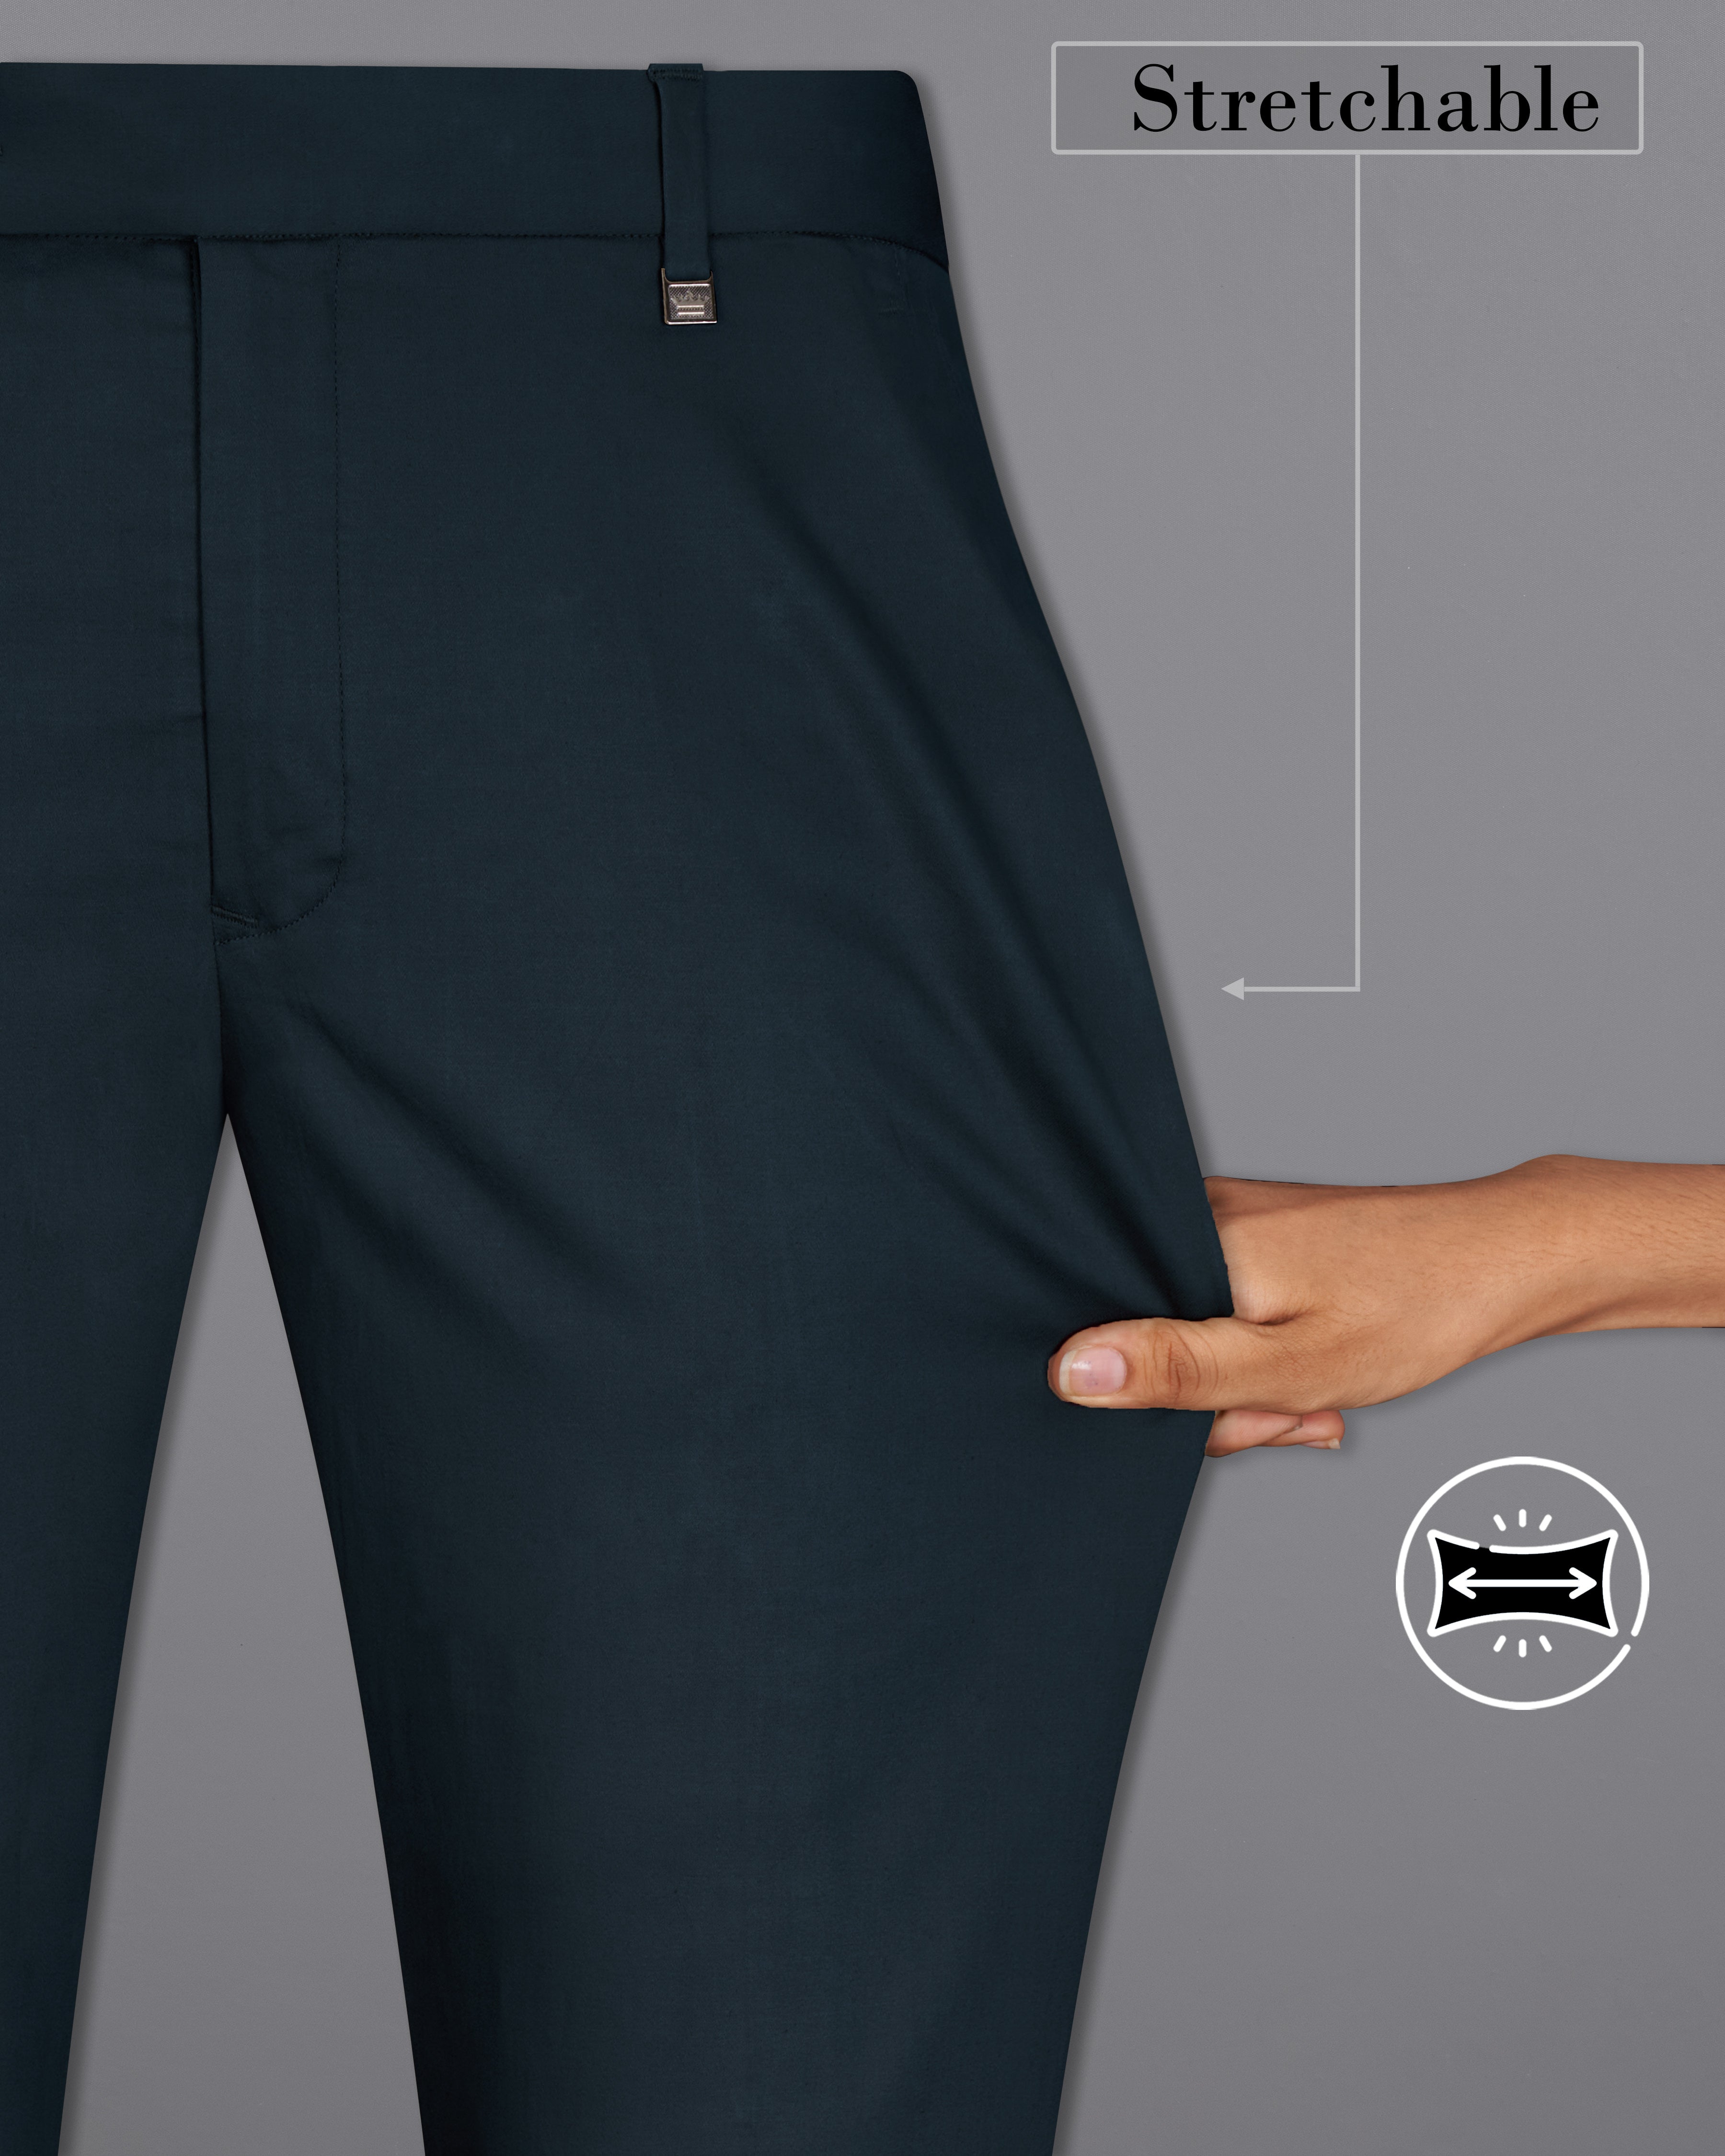 Pants, Trousers & Slacks — The Difference Explained